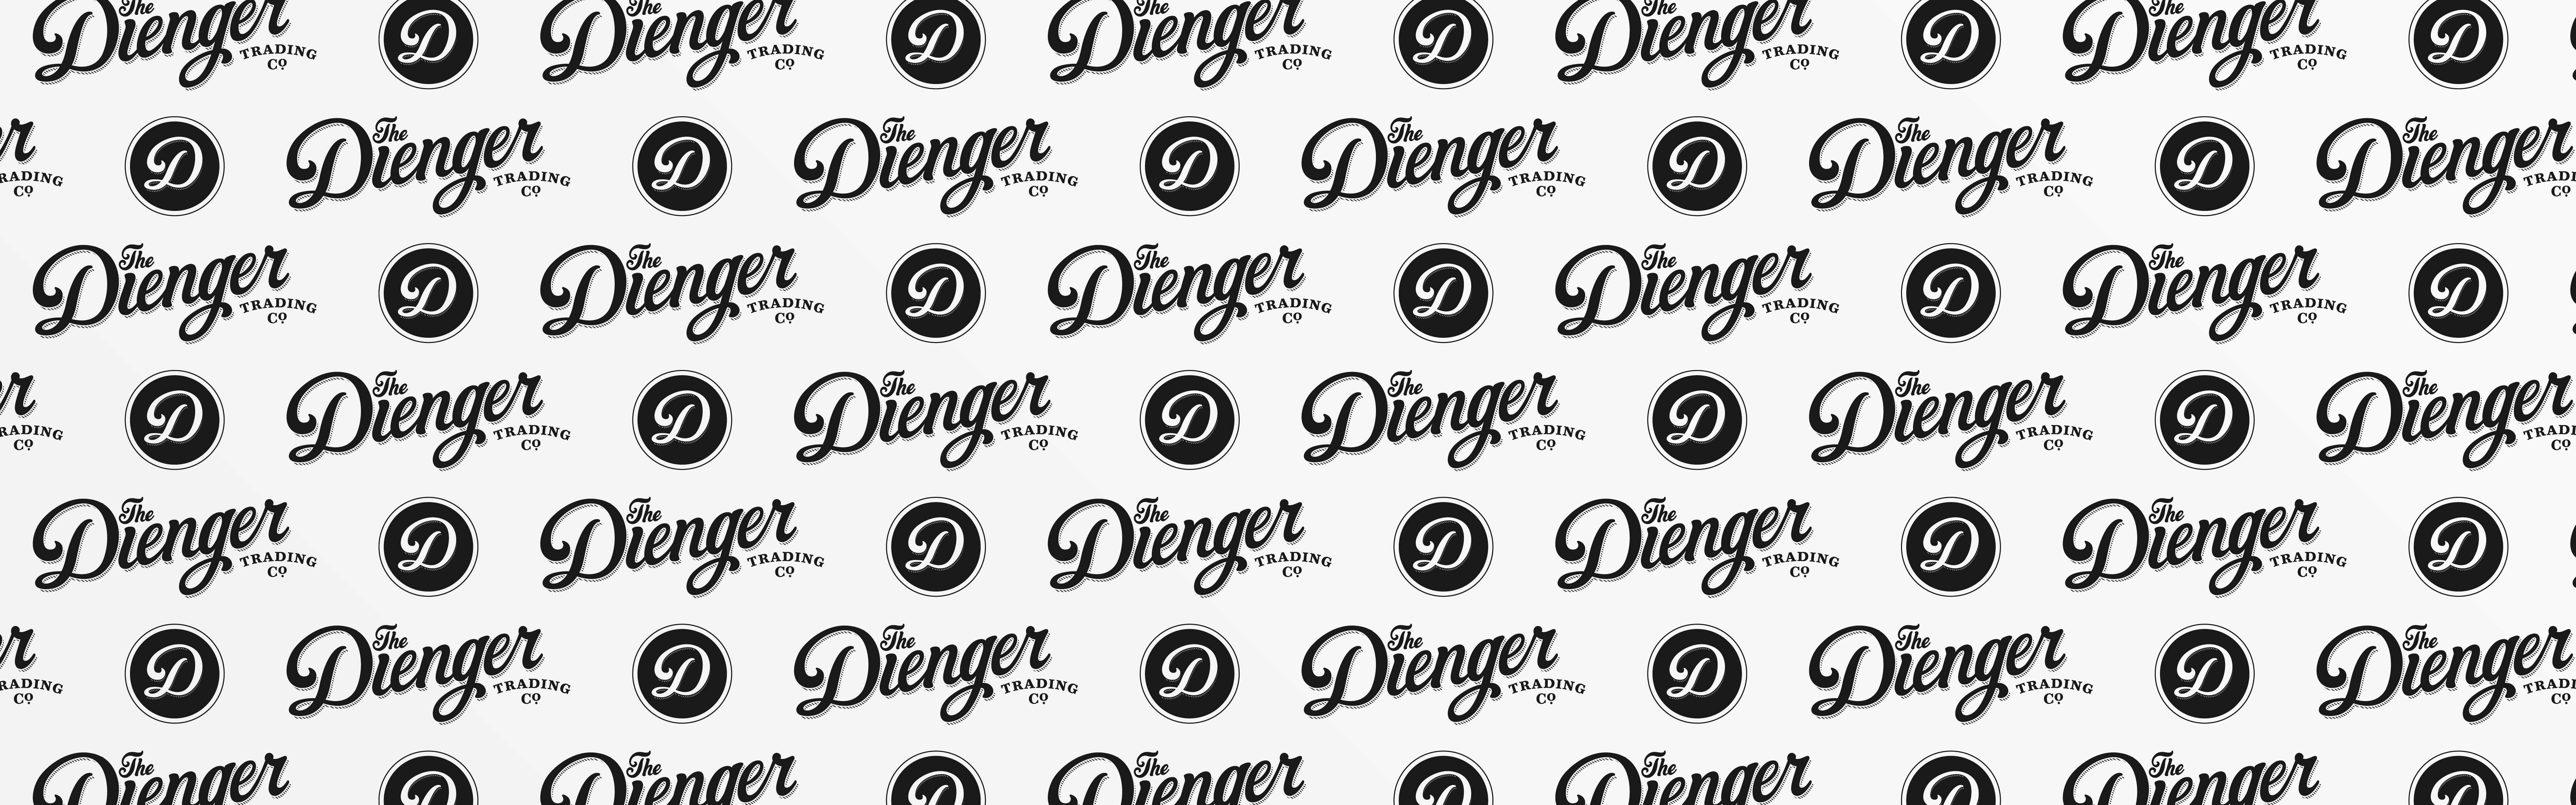 A repetitive pattern of black and white logos for The Dienger Trading Co. 